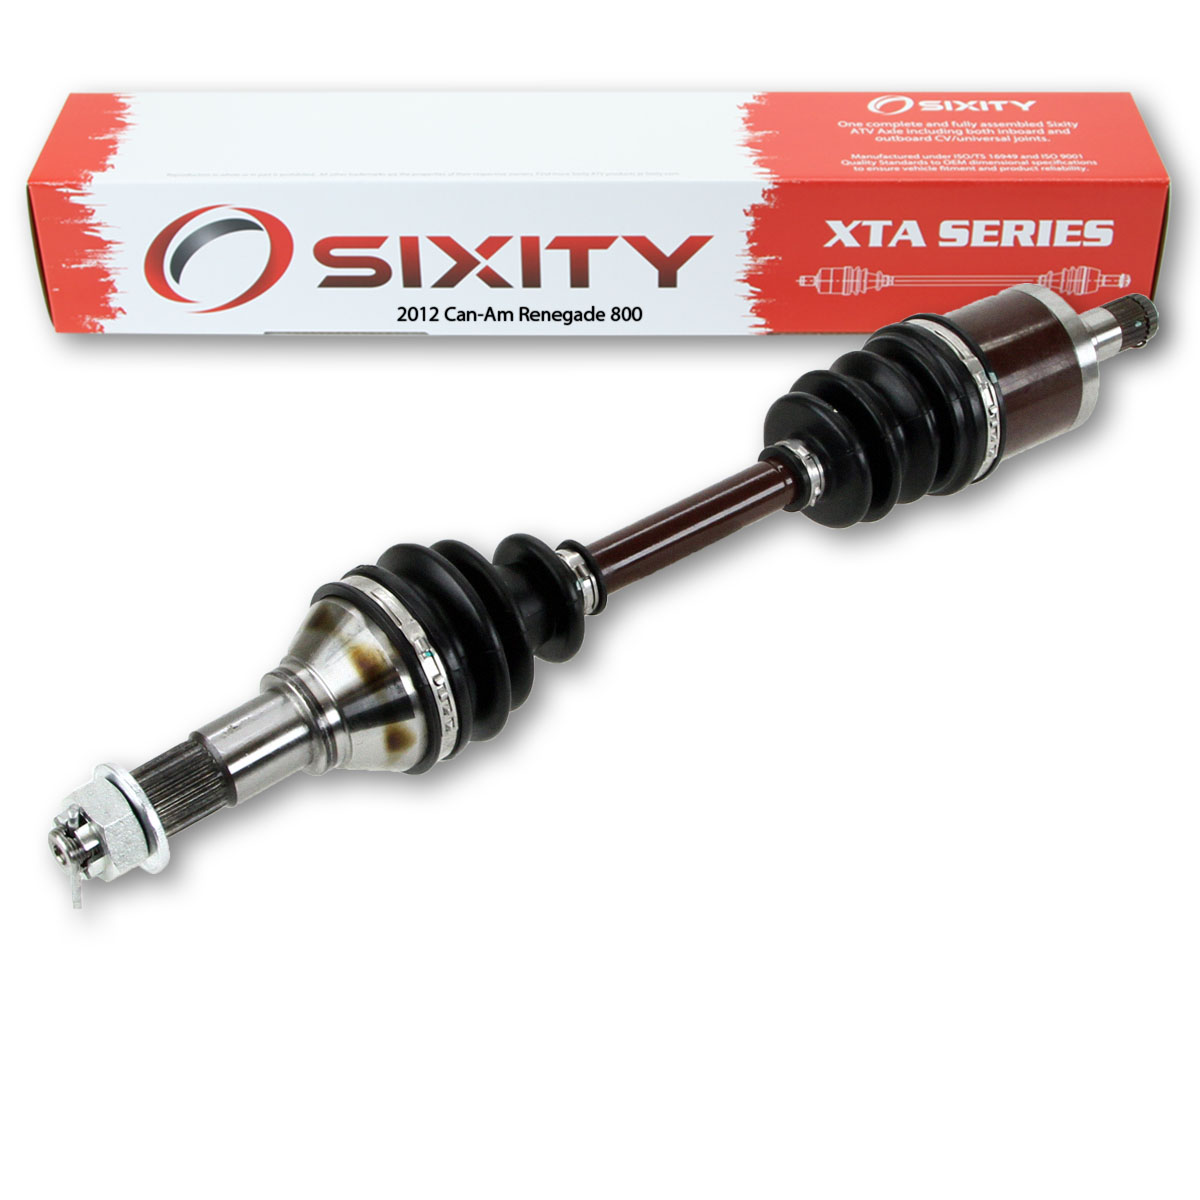 Sixity 2012 Can-Am Renegade 800 4X4 Front Left XTA ATV Axle